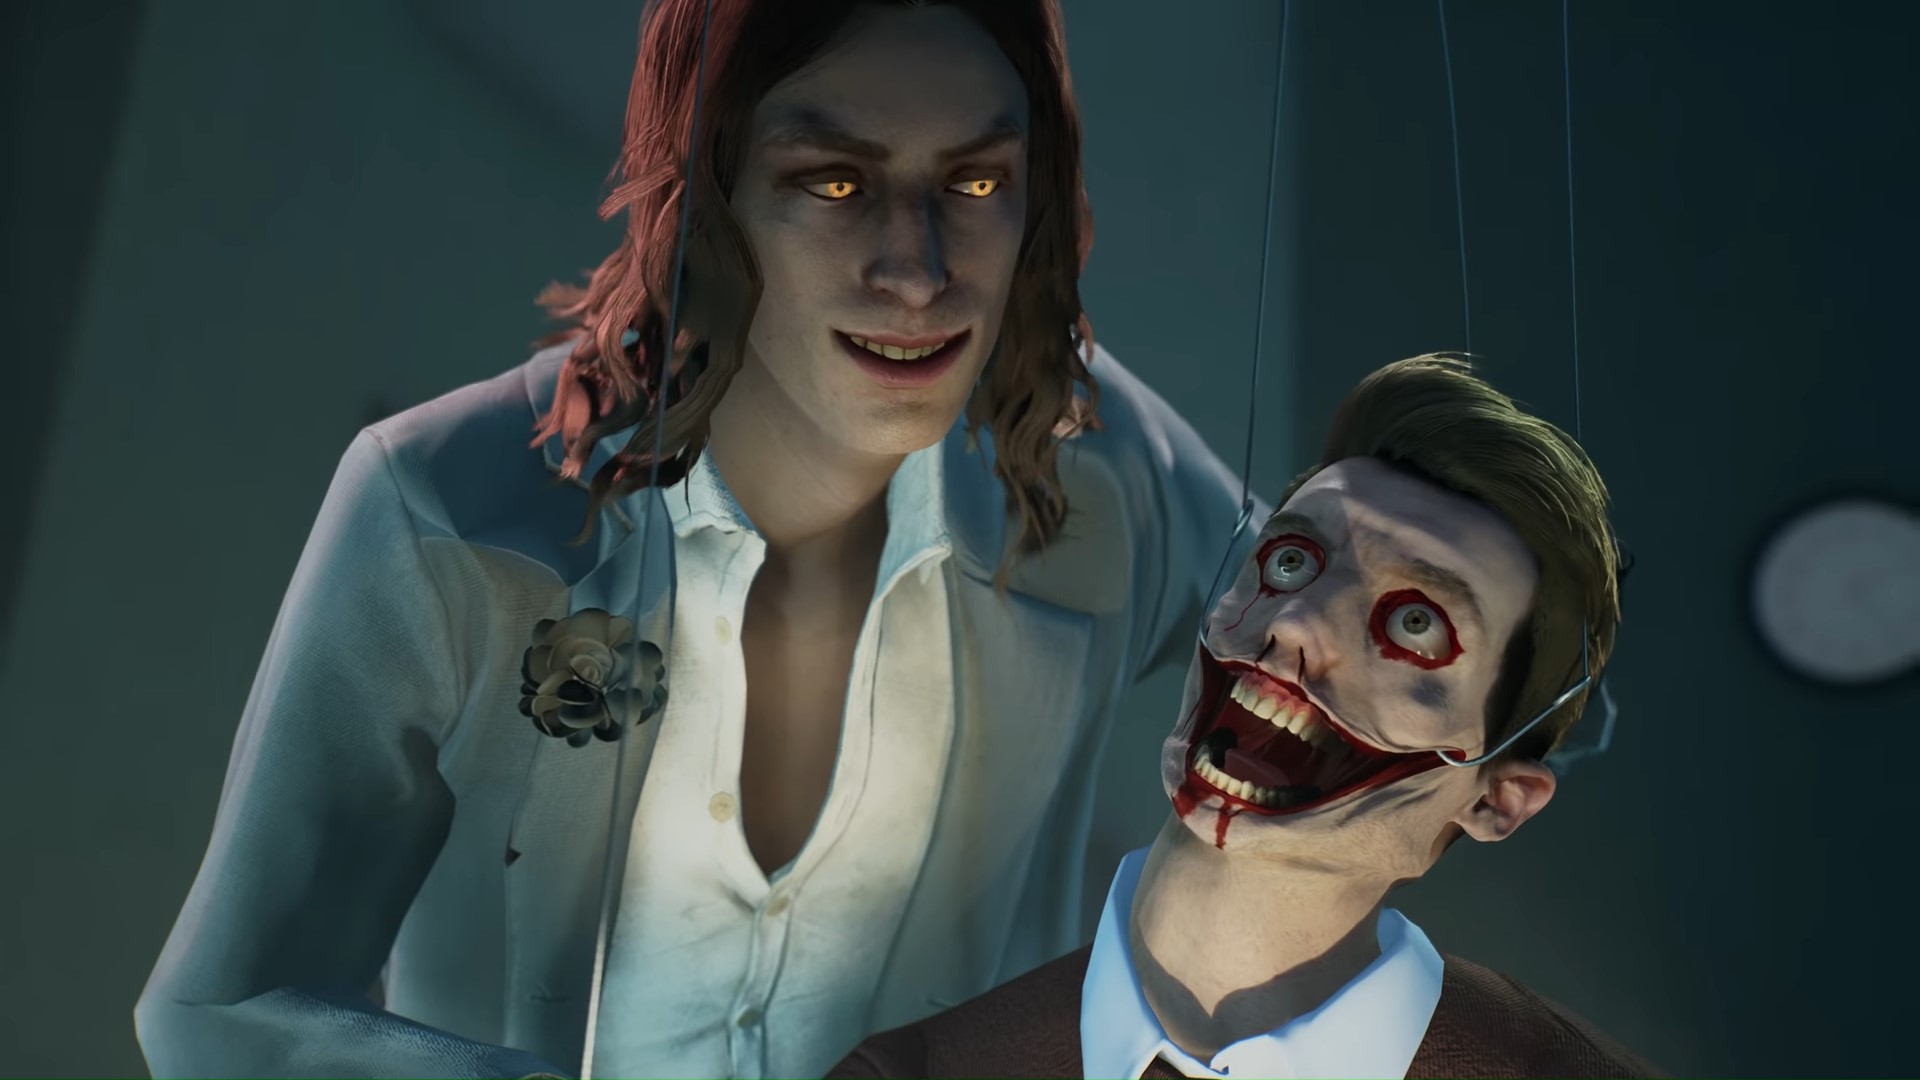 Vampire: The Masquerade - Bloodlines 2 Developer Has Been Dropped